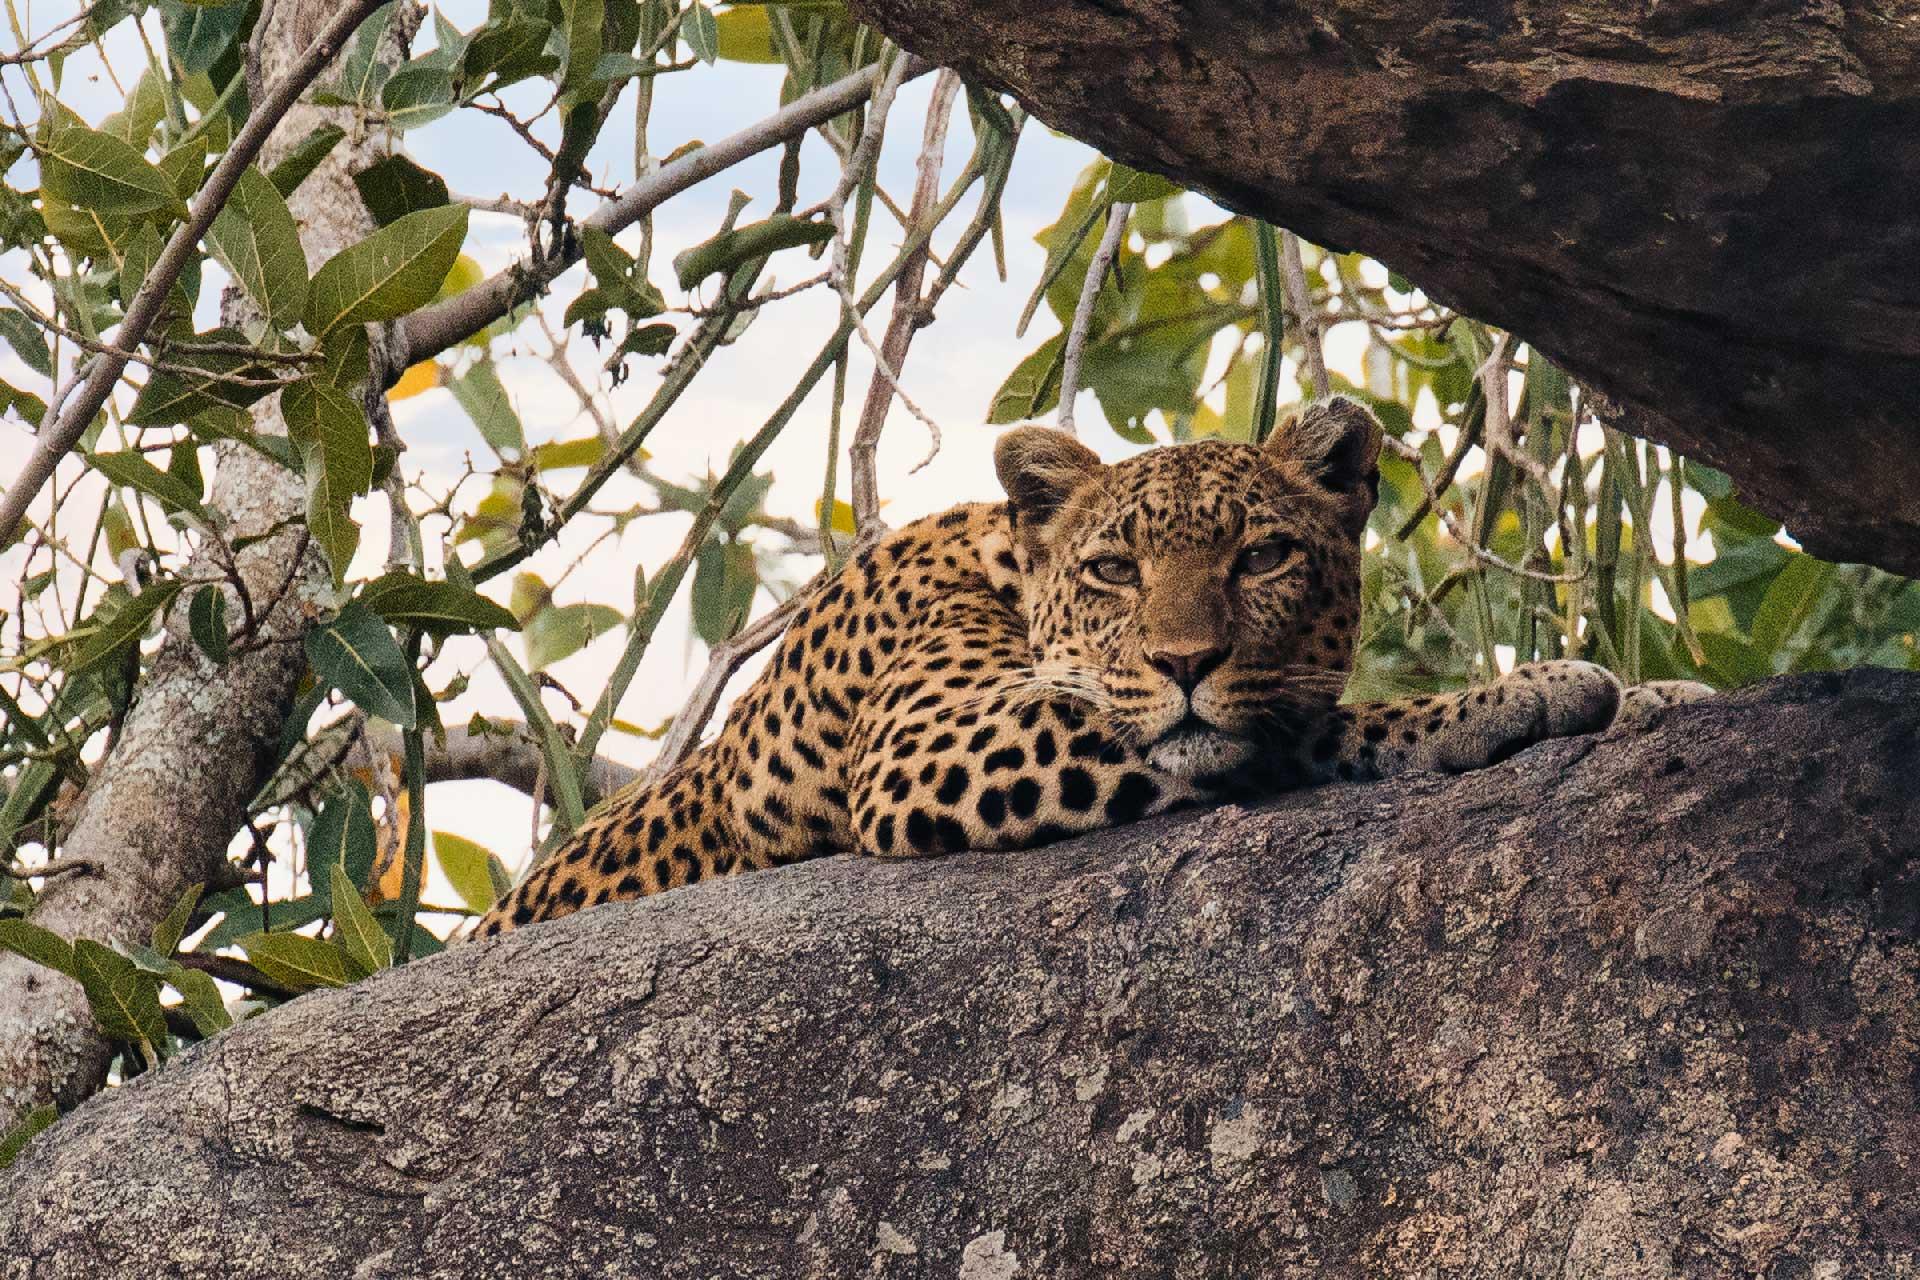 It is listed as Vulnerable on the IUCN Red List because leopard populations are threatened by habitat loss and fragmentation, and are declining in large parts of the global range
